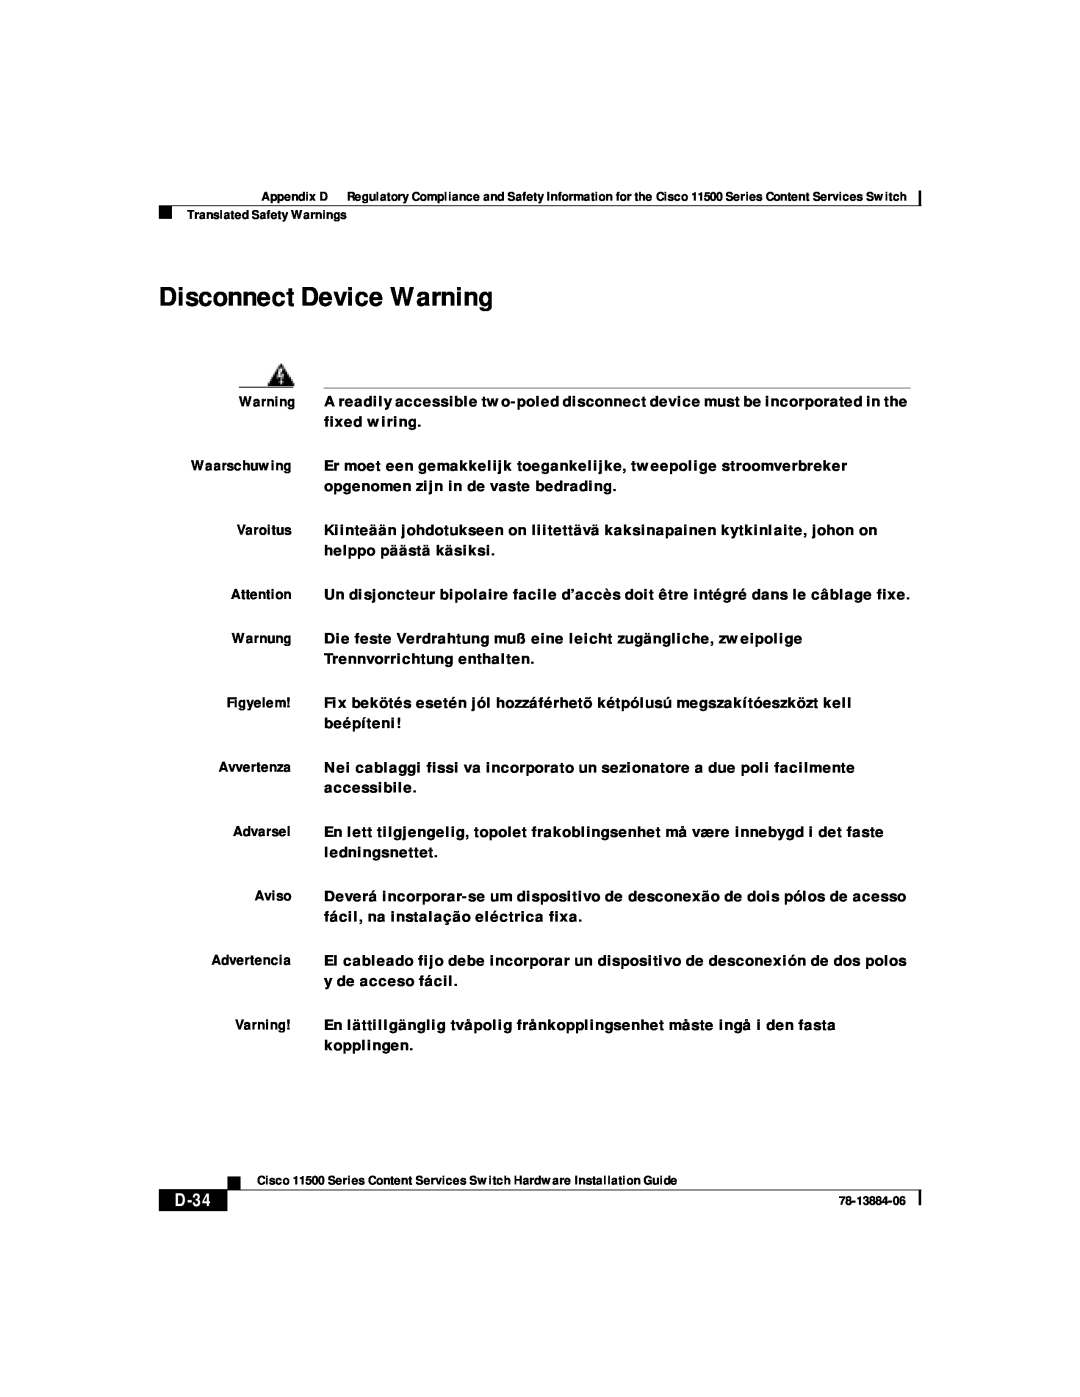 Cisco Systems 11500 Series manual Disconnect Device Warning, D-34 